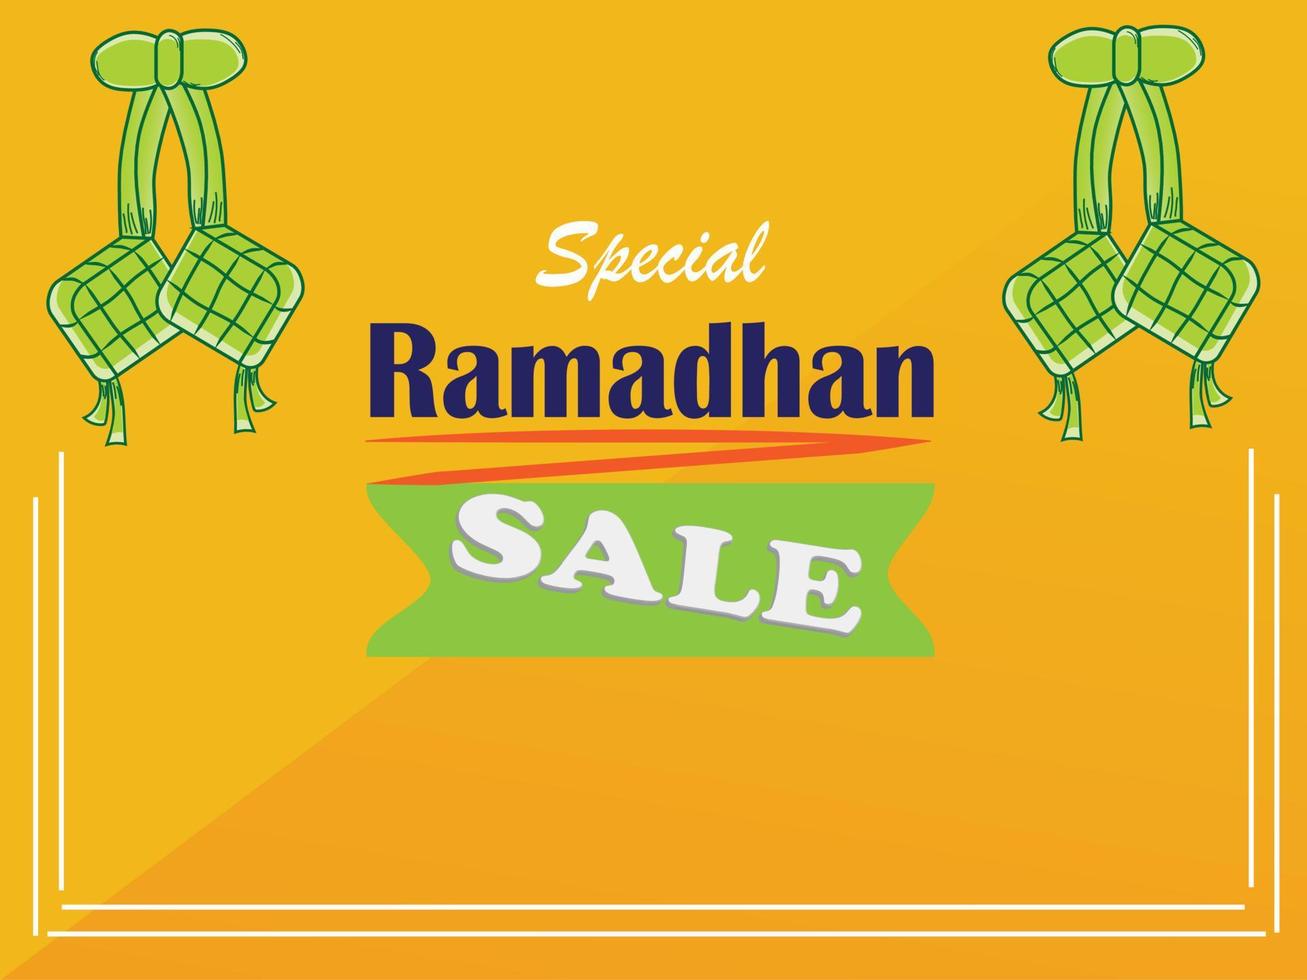 Ramadan sale banner template promotion design, suitable for web promotion and social media, vector illustration.